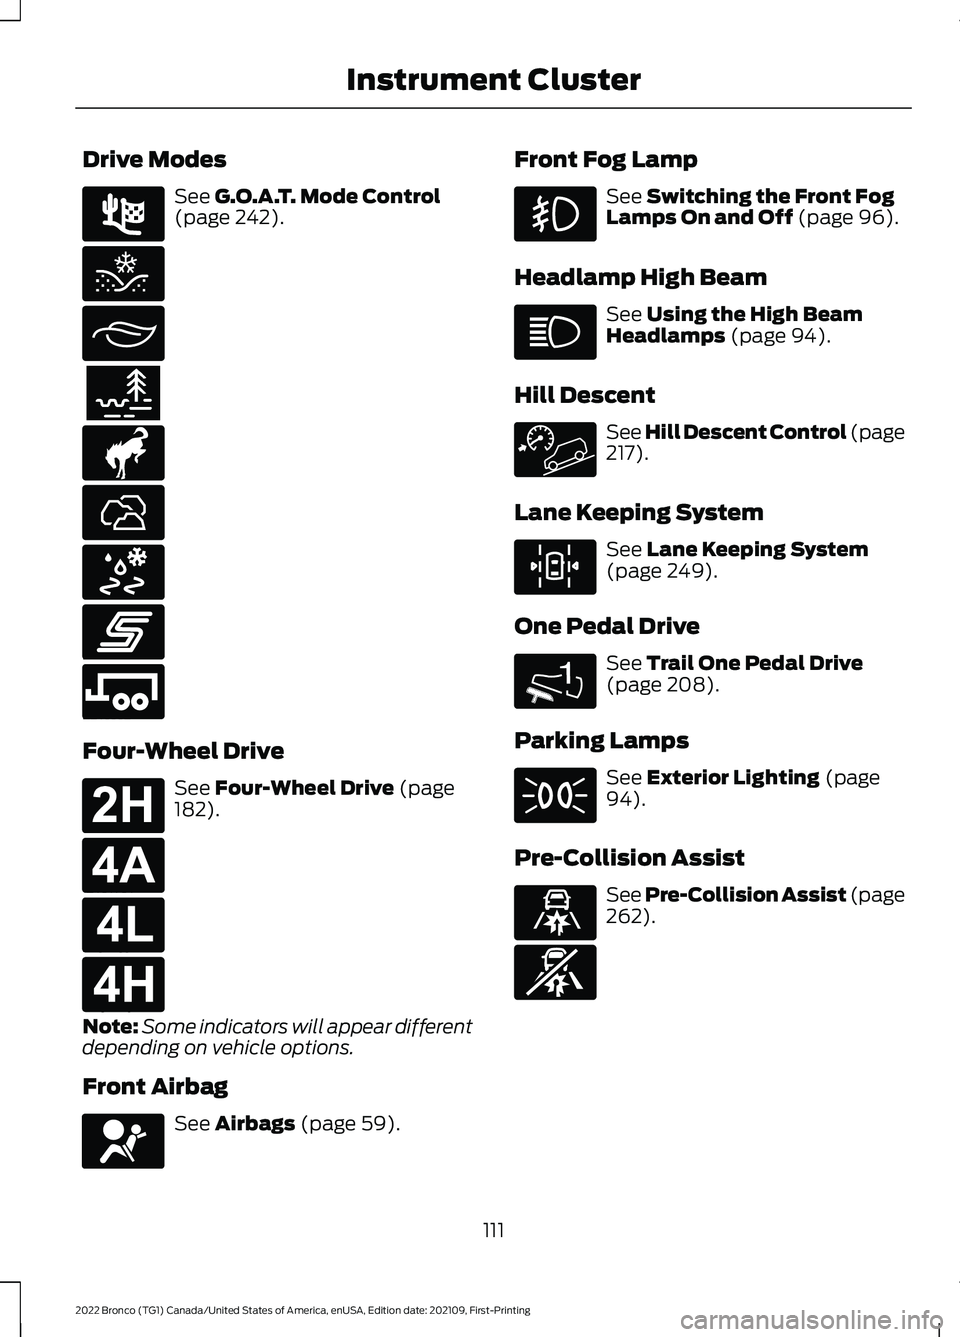 FORD BRONCO 2022 User Guide Drive Modes
See G.O.A.T. Mode Control(page 242).
Four-Wheel Drive
See Four-Wheel Drive (page182).
Note:Some indicators will appear differentdepending on vehicle options.
Front Airbag
See Airbags (page